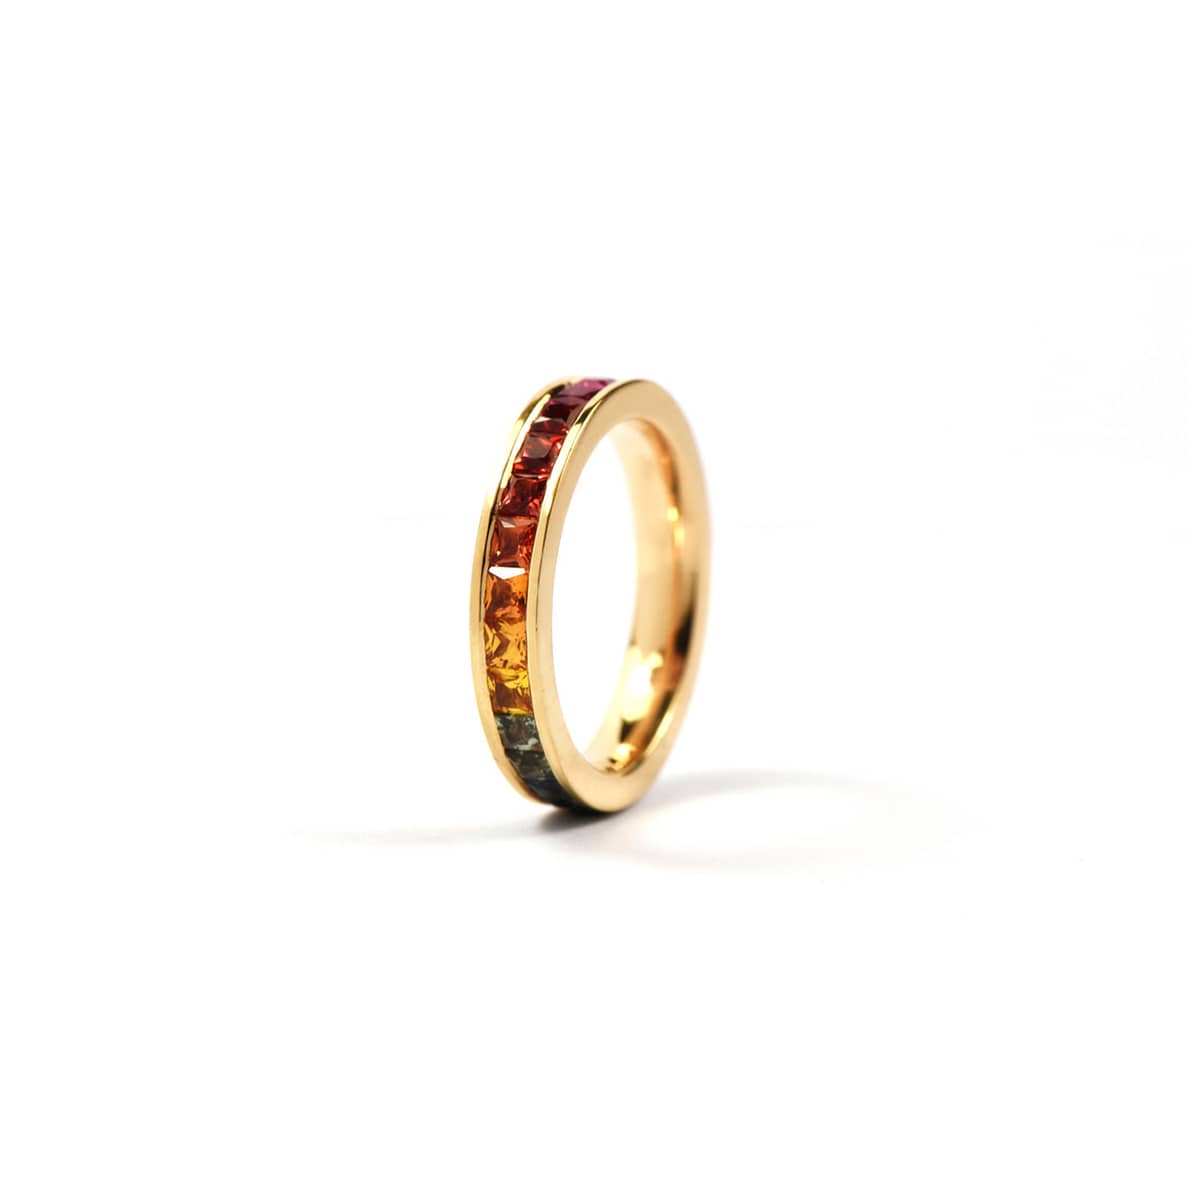 O'Dwyer Red Gold Rainbow Channel Set Ring. Tis ring is crafted from 18ct red gold. It is channel set with a rainbow of carré sapphires, bringing joy and love to every person that sees it. 